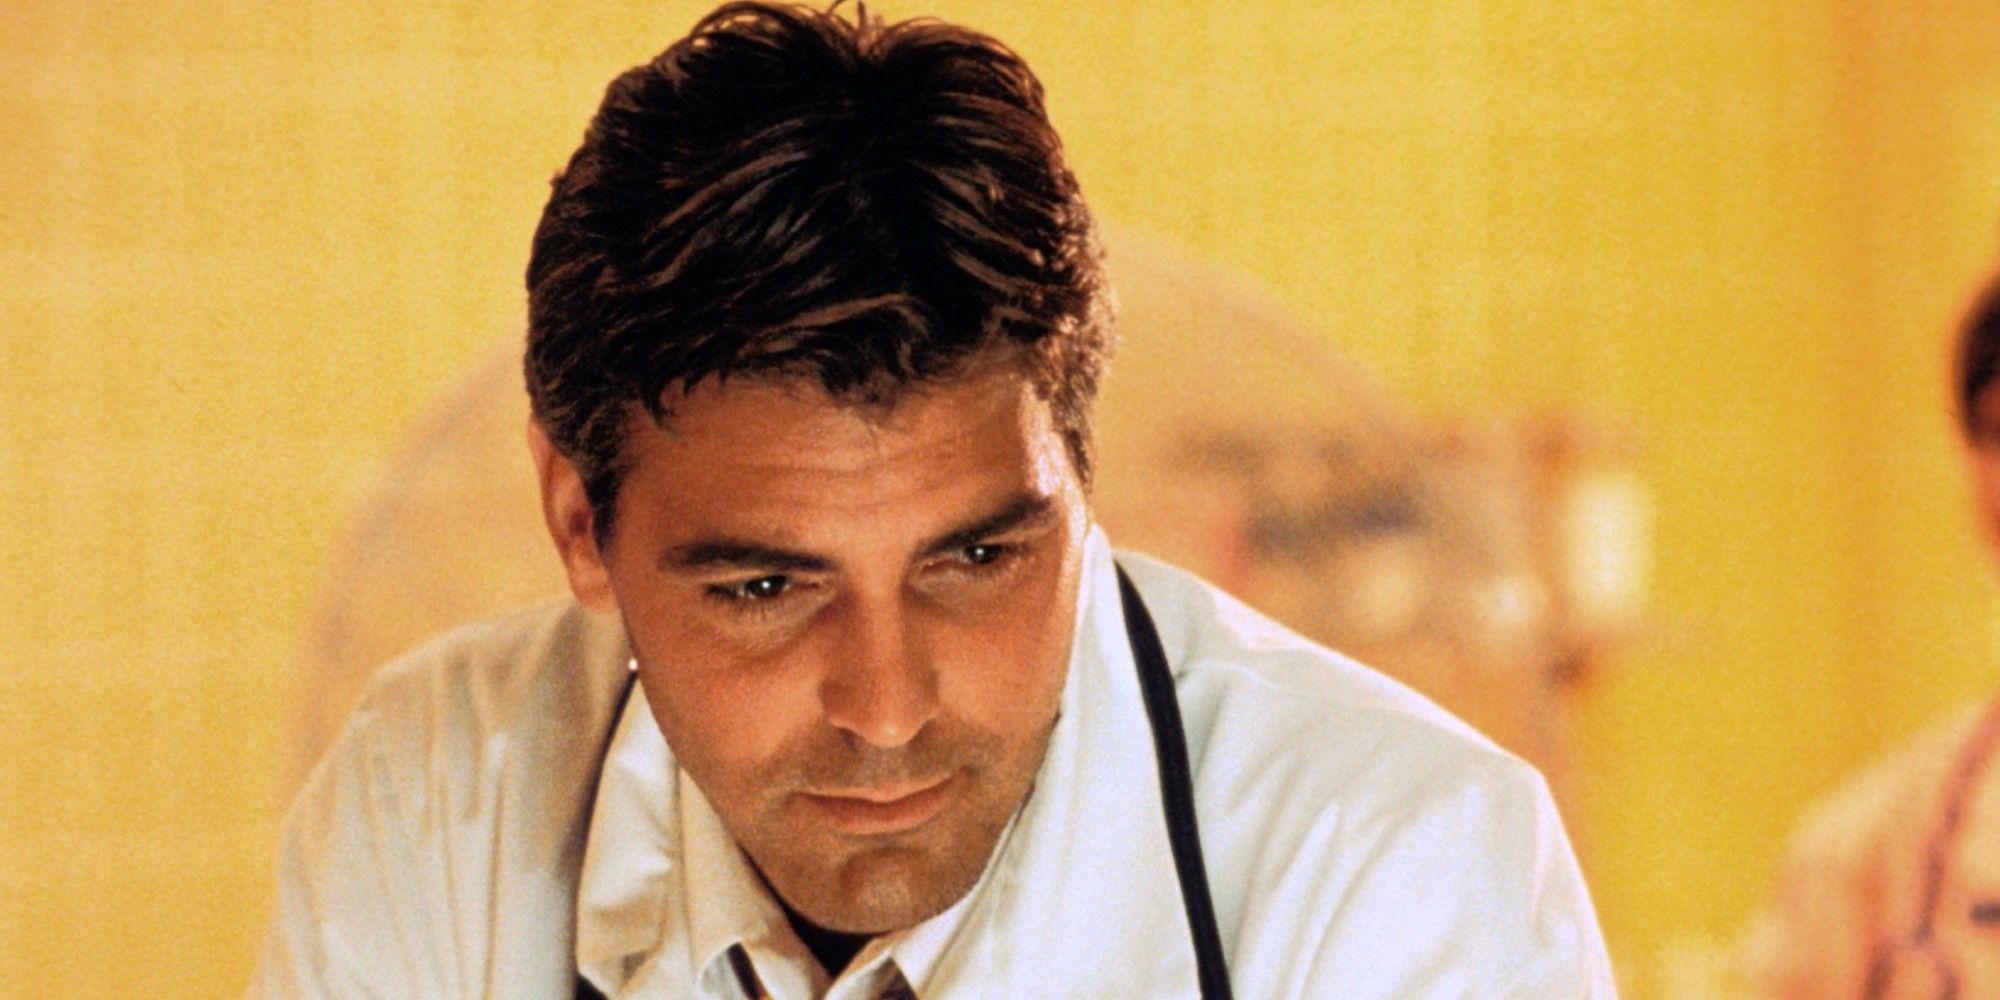 George Clooney in ER show